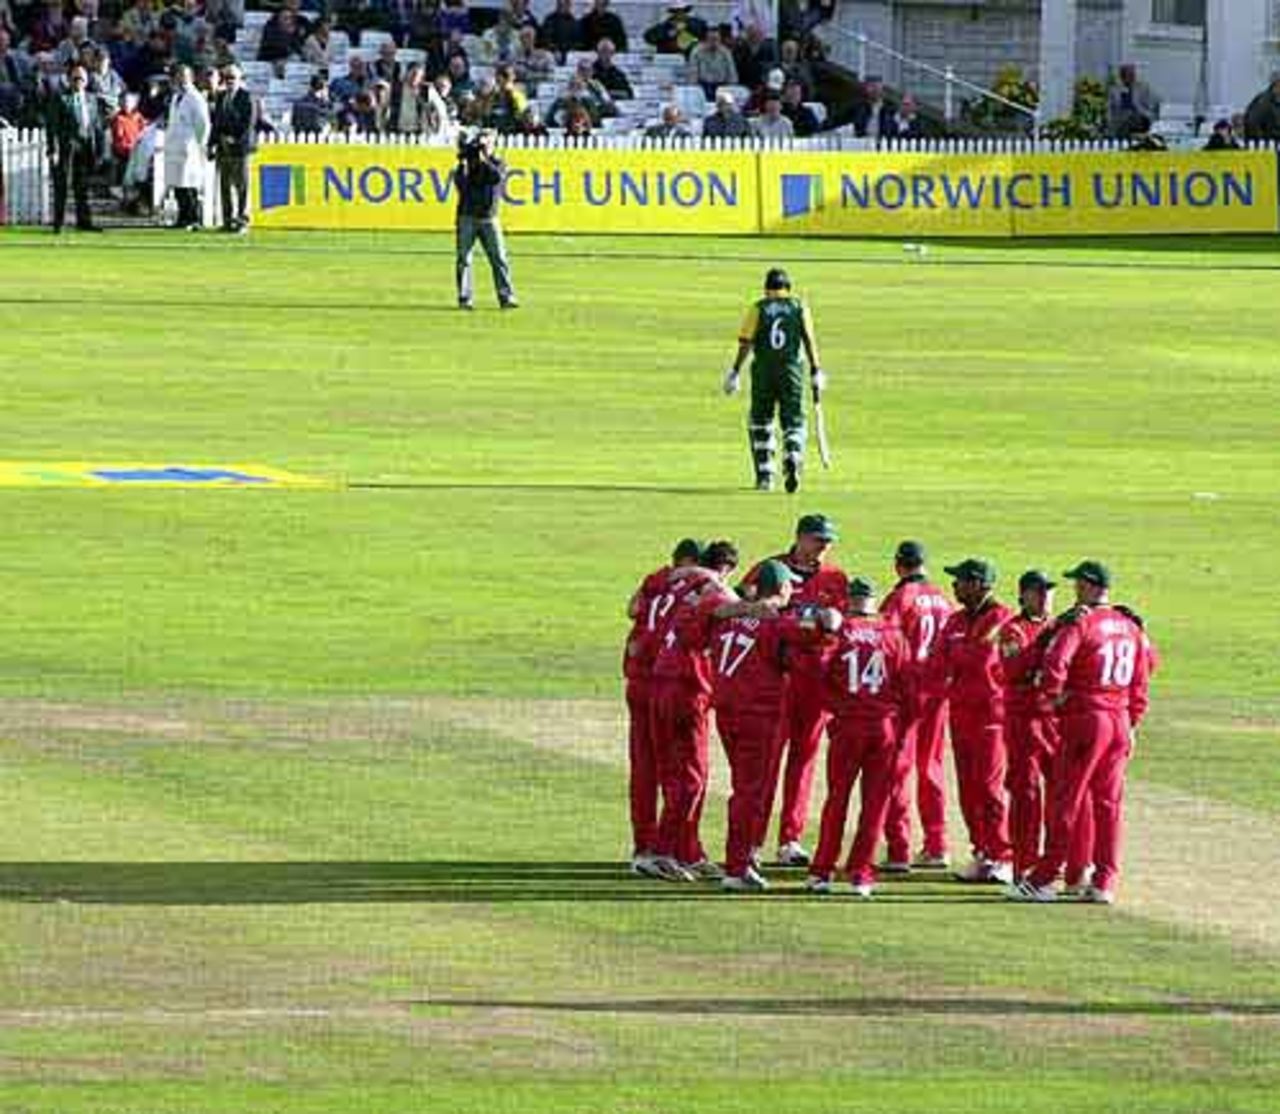 Off goes Afzaal as Leics huddle at Trent Bridge, 16th September 2001